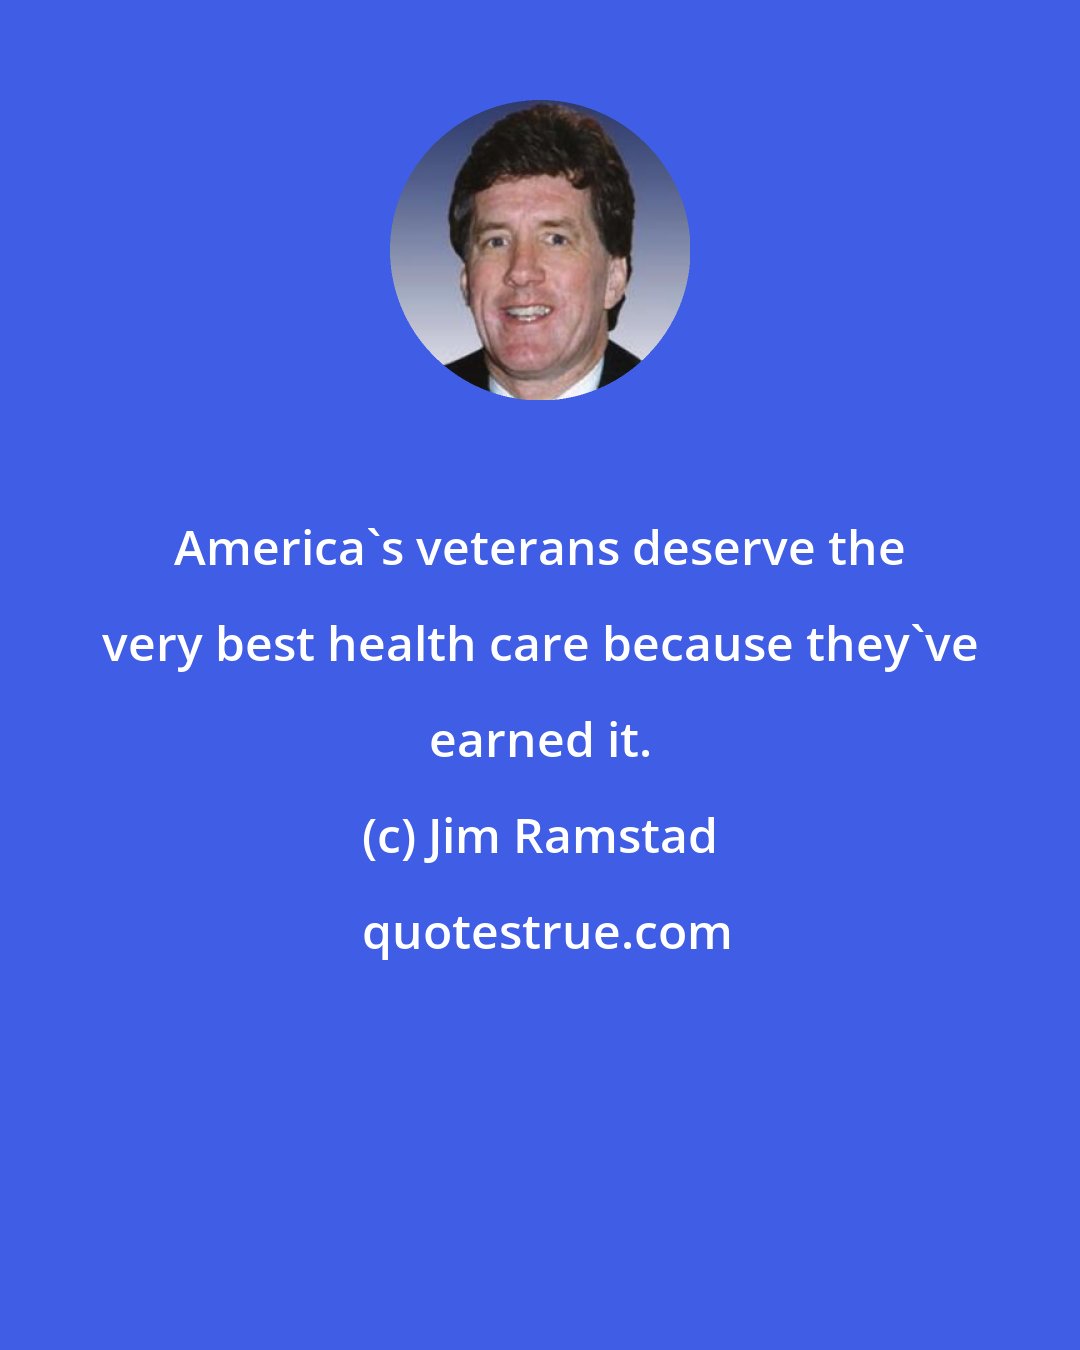 Jim Ramstad: America's veterans deserve the very best health care because they've earned it.